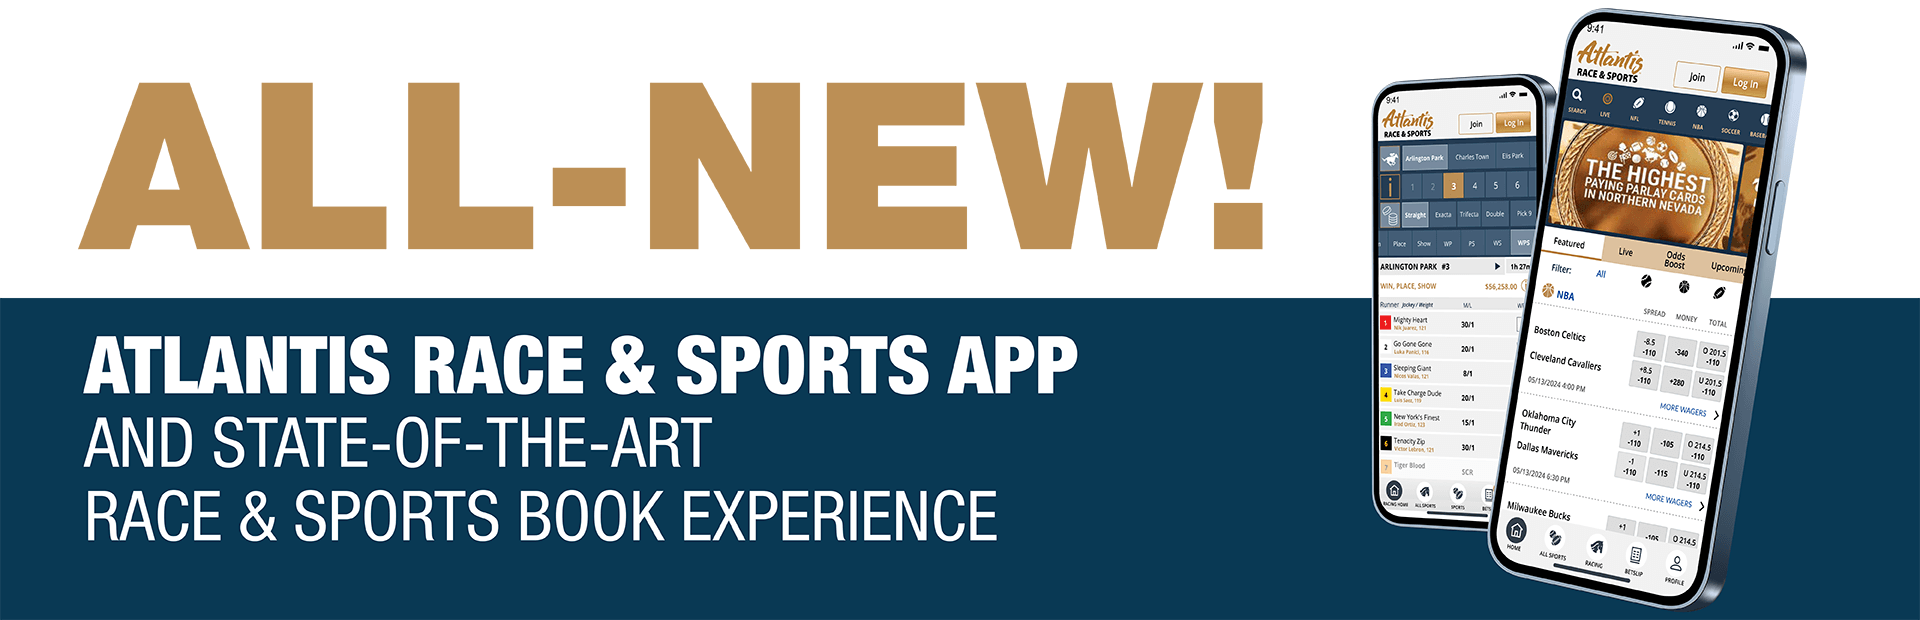 All New Atlantis Race and Sports App